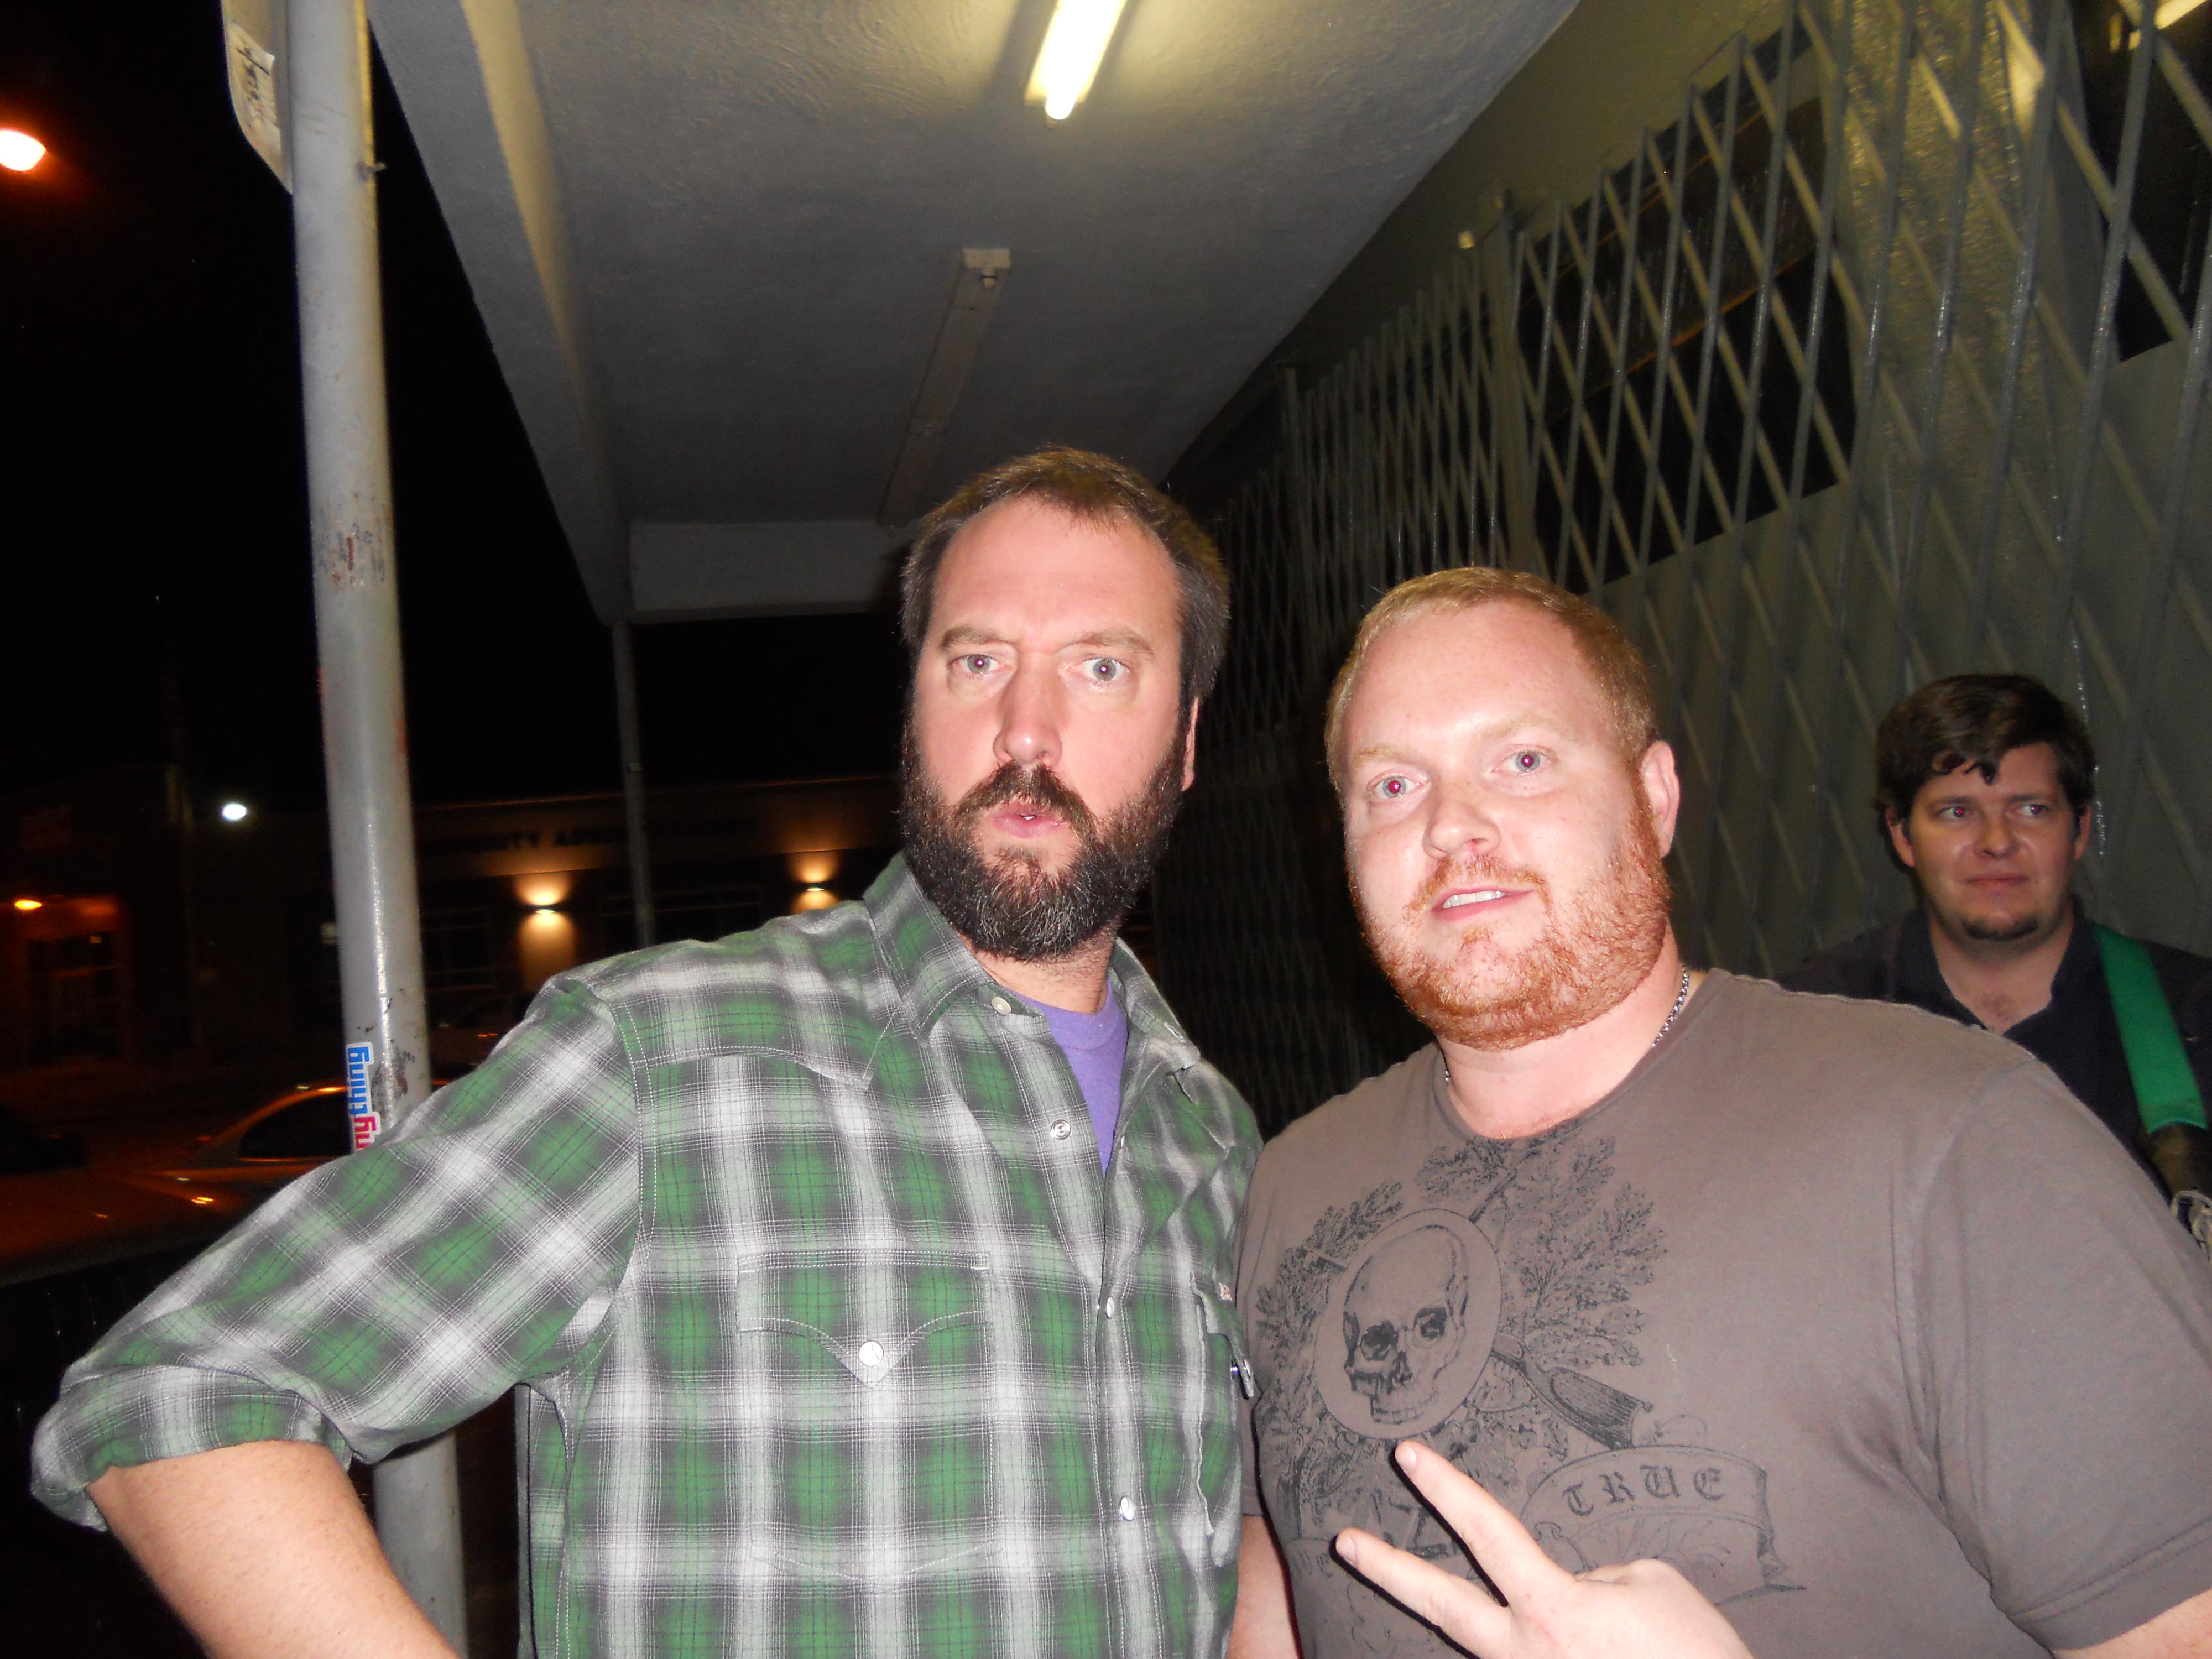 Jonathan Darden with Tom Green at 3 Ace's